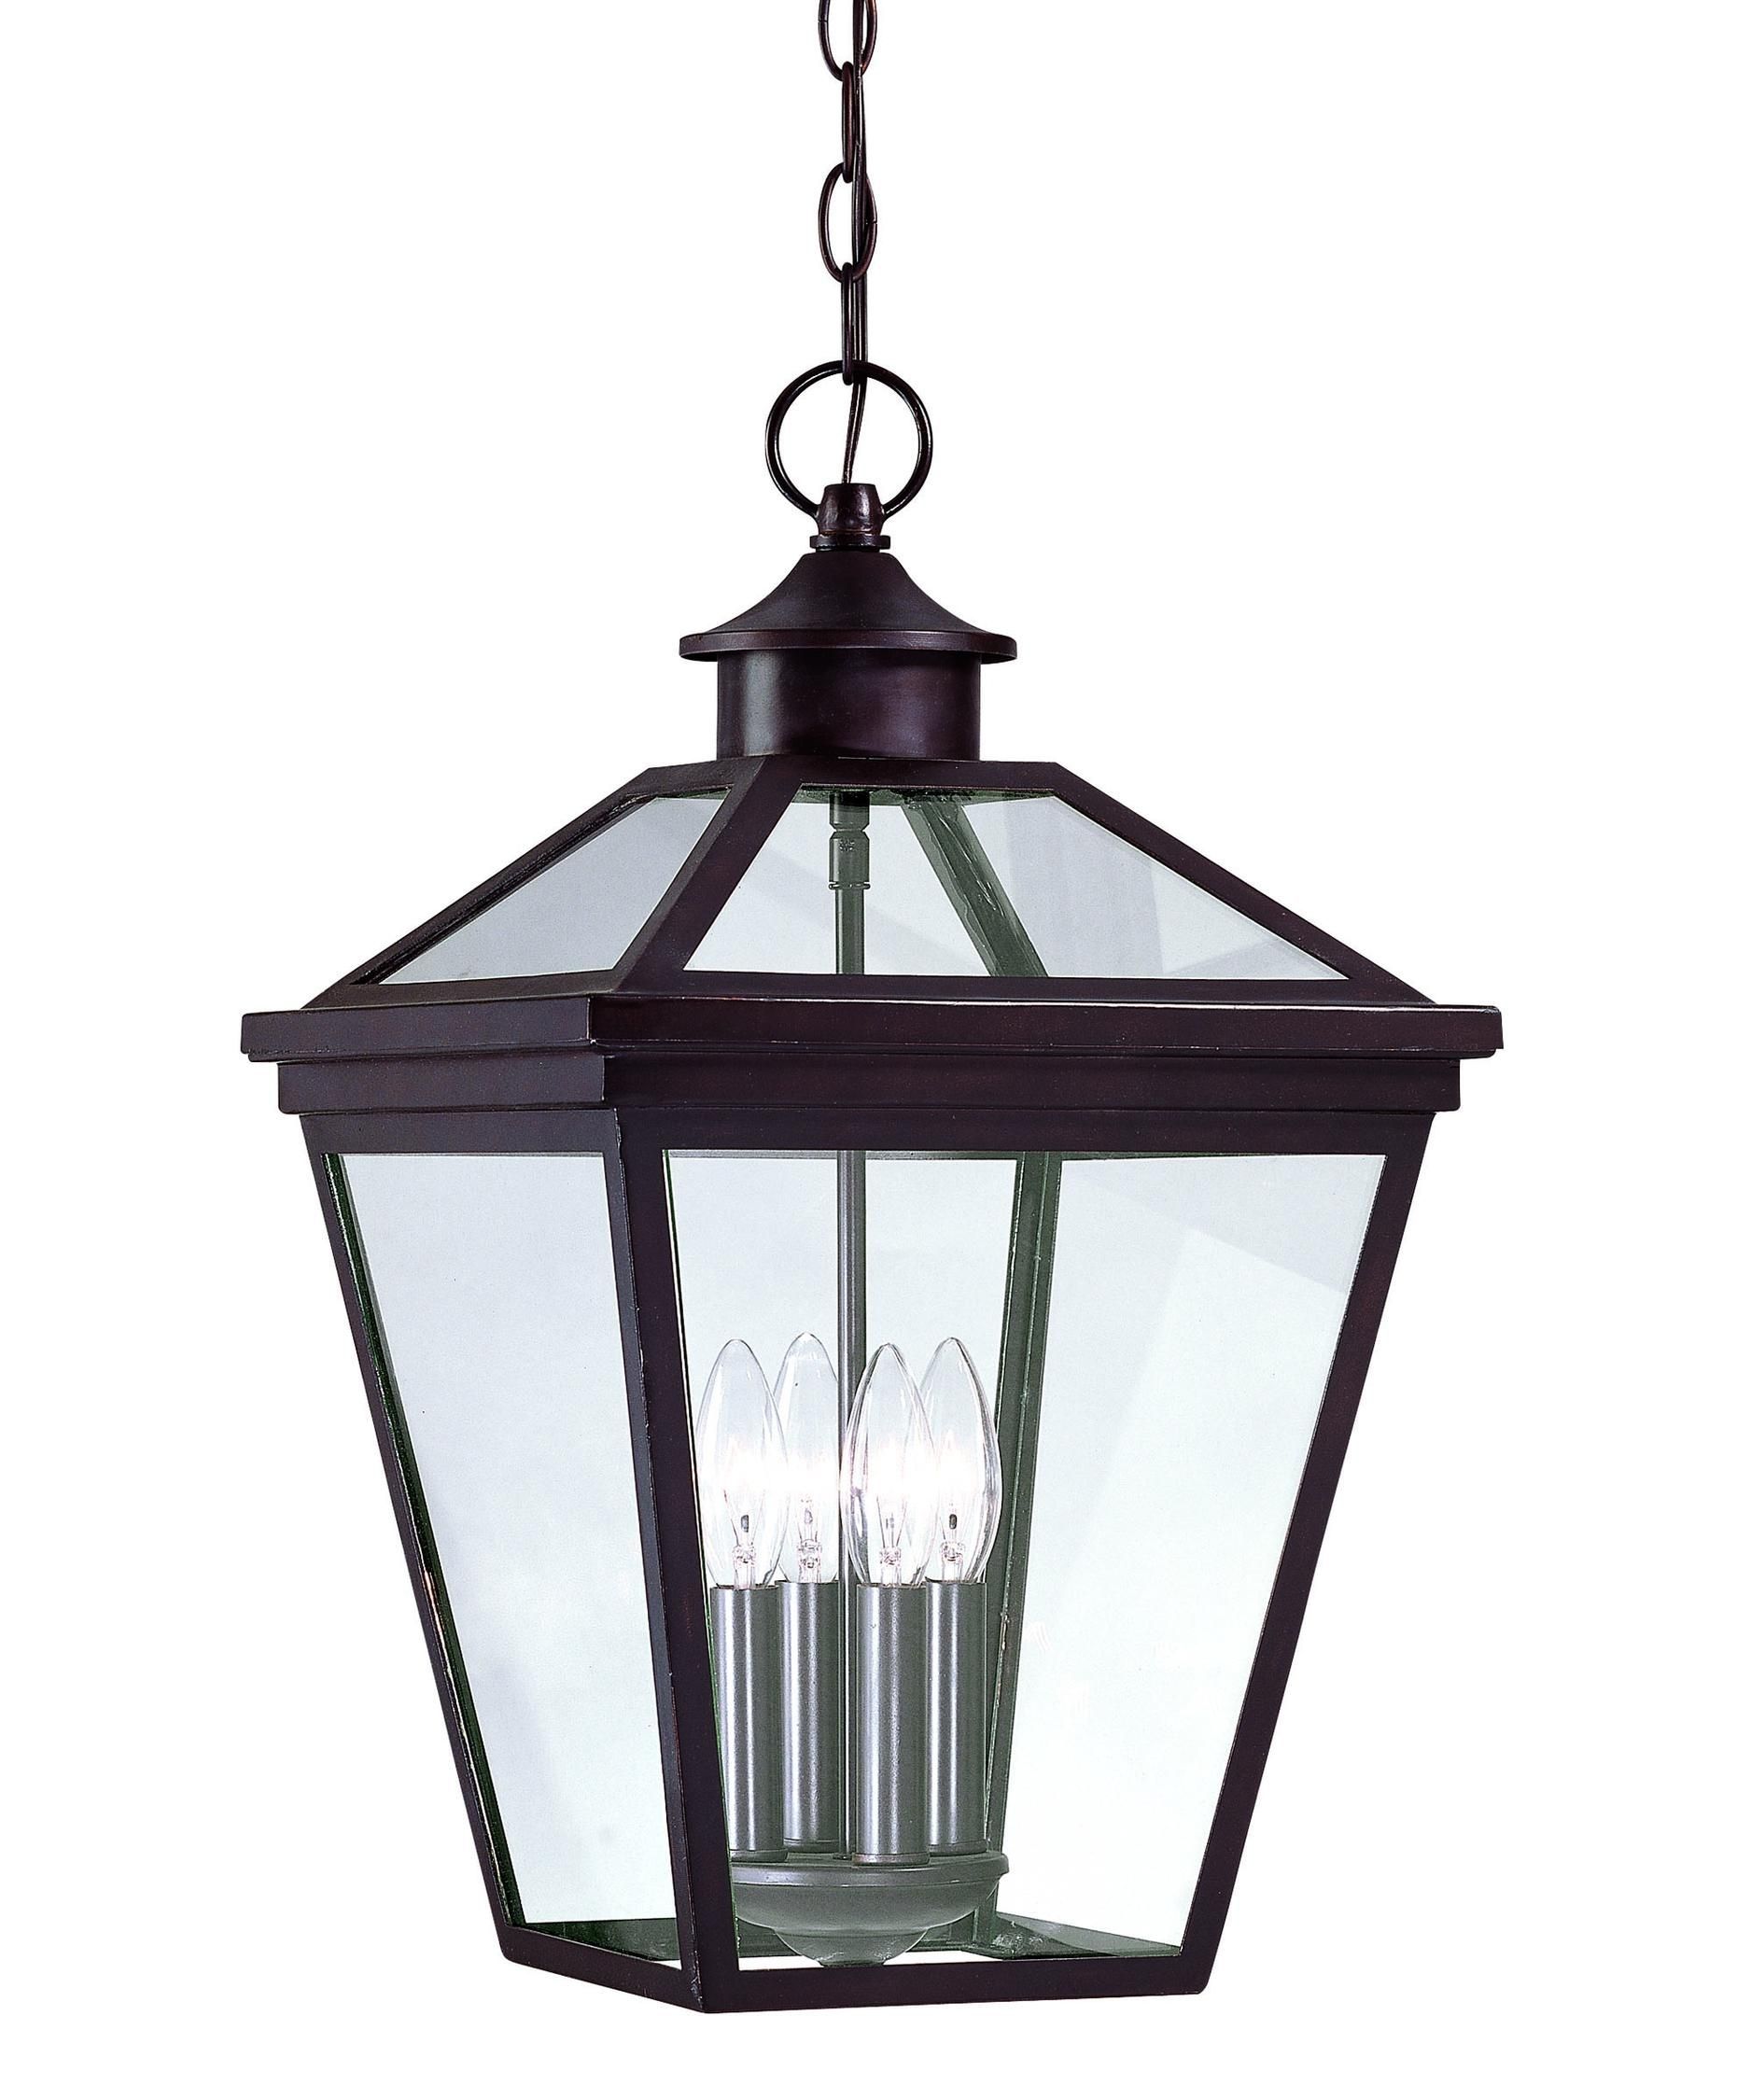 Savoy House Ellijay 4 Light Outdoor Hanging Lantern | Capitol Within White Outdoor Hanging Lanterns (View 6 of 15)